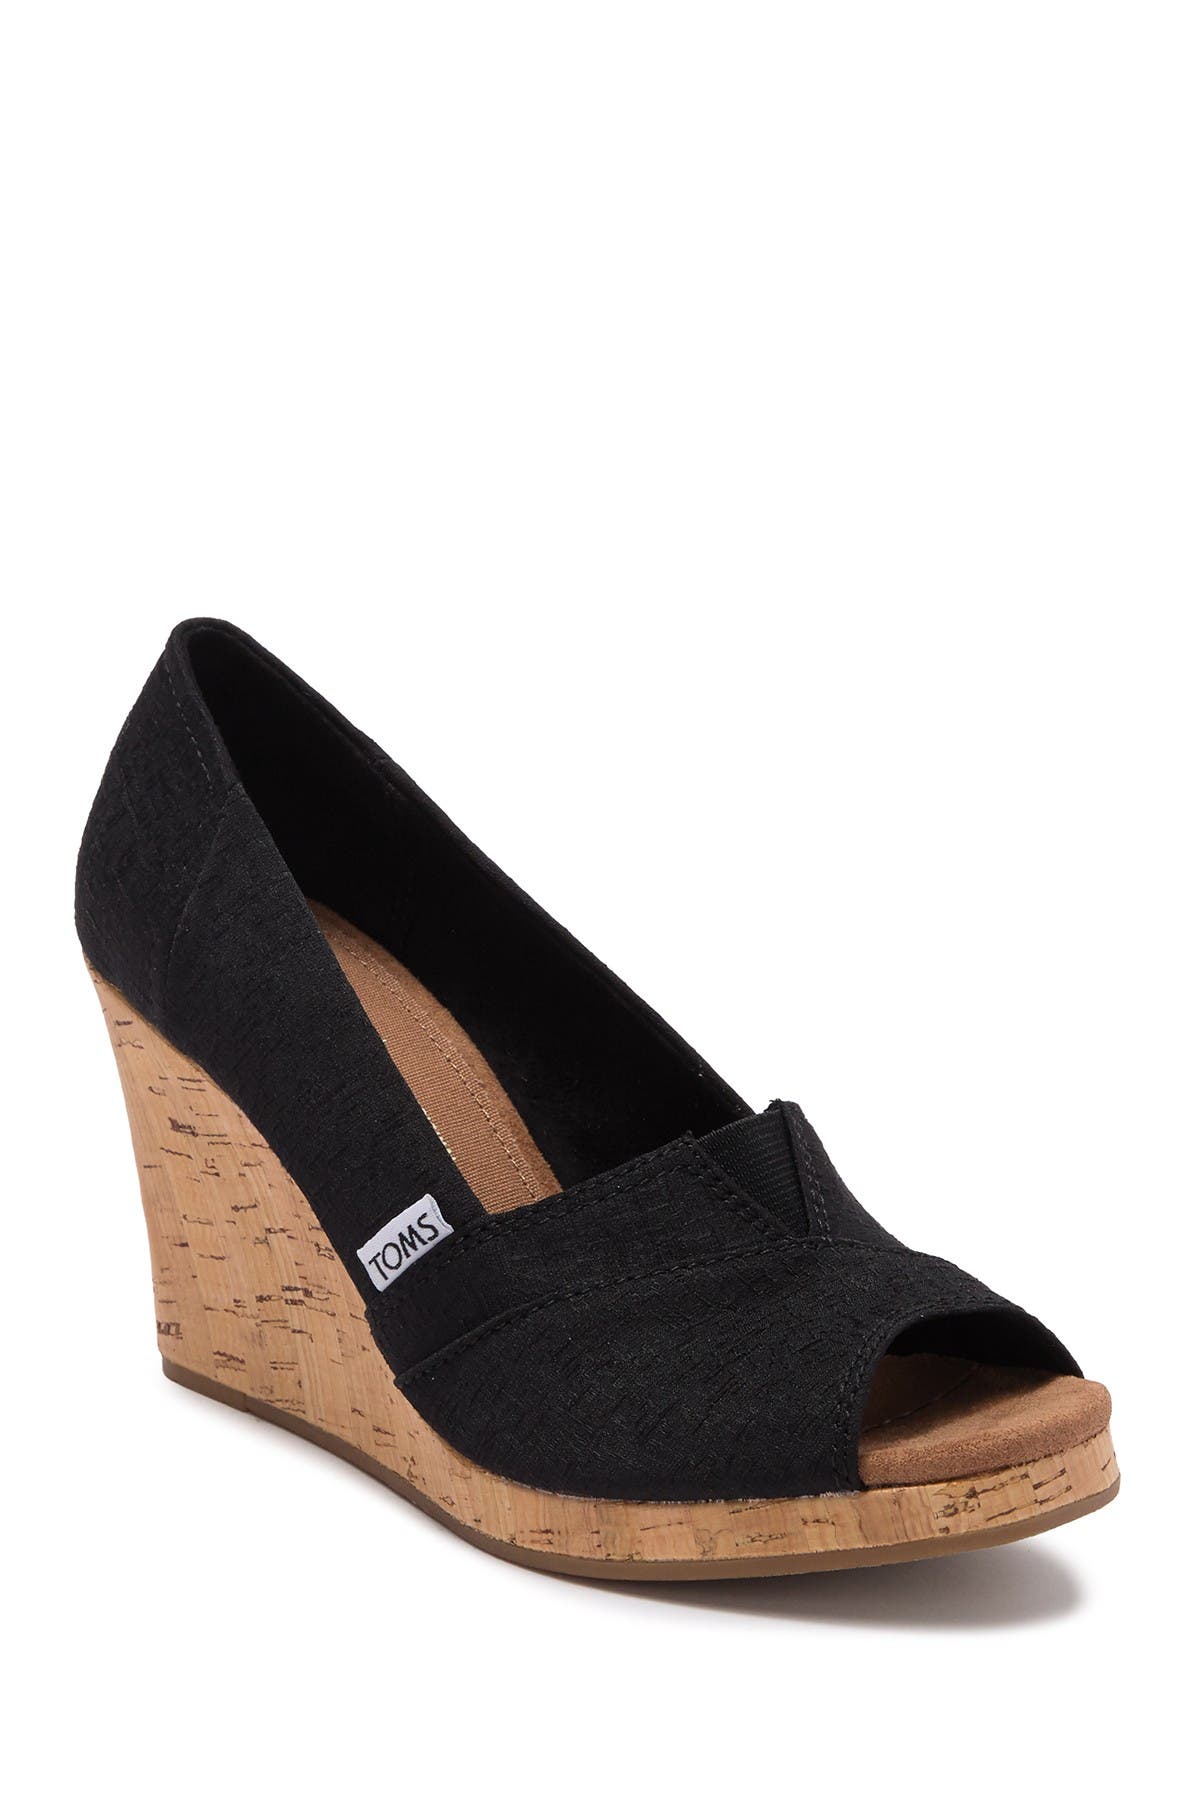 toms wedges canada